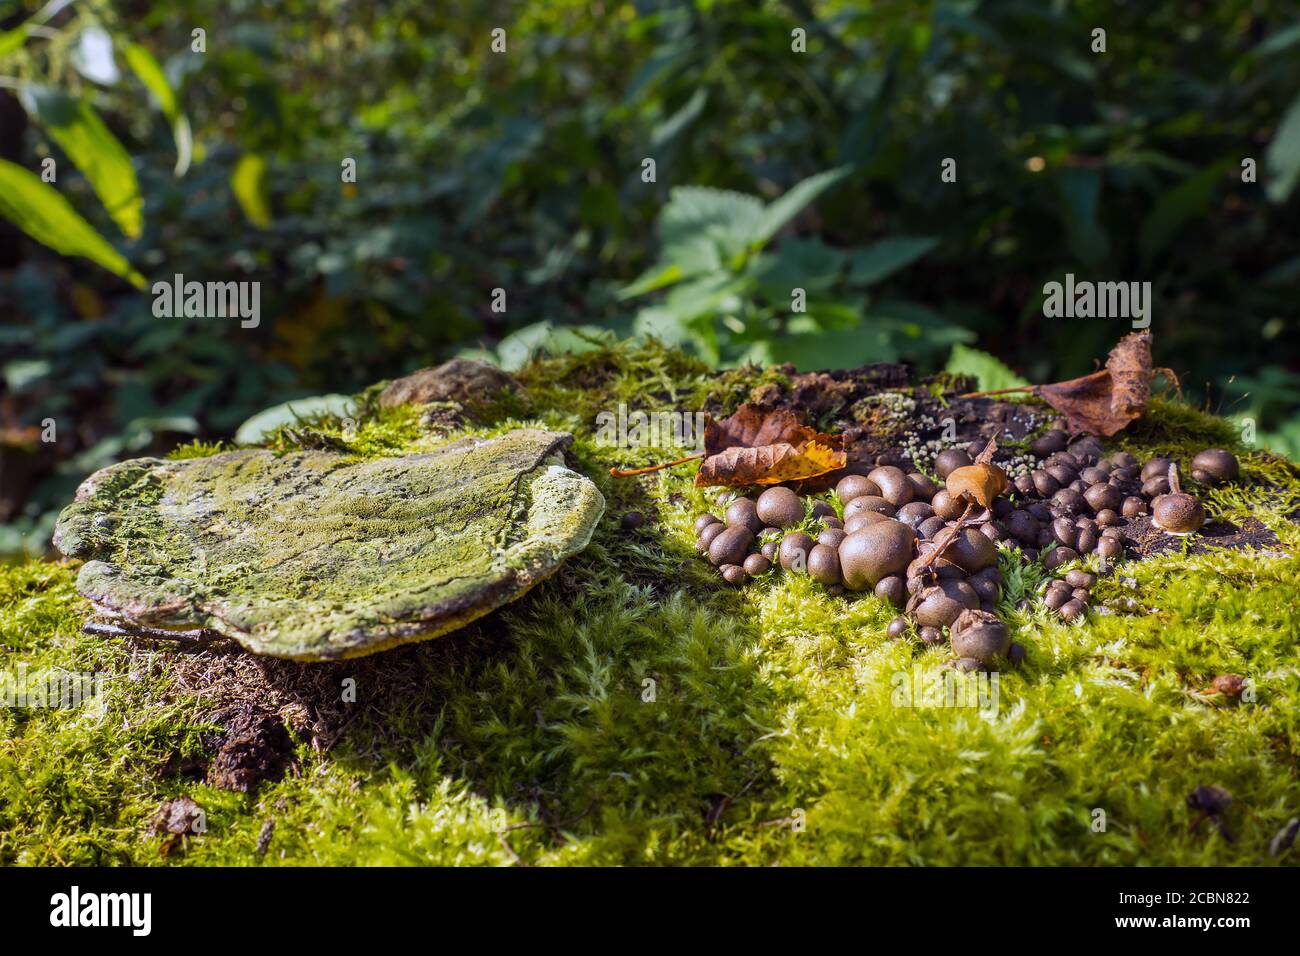 brown earth balls fungus grows on a stump, green moss and old tinder false, Scleroderma citrinum. Stock Photo